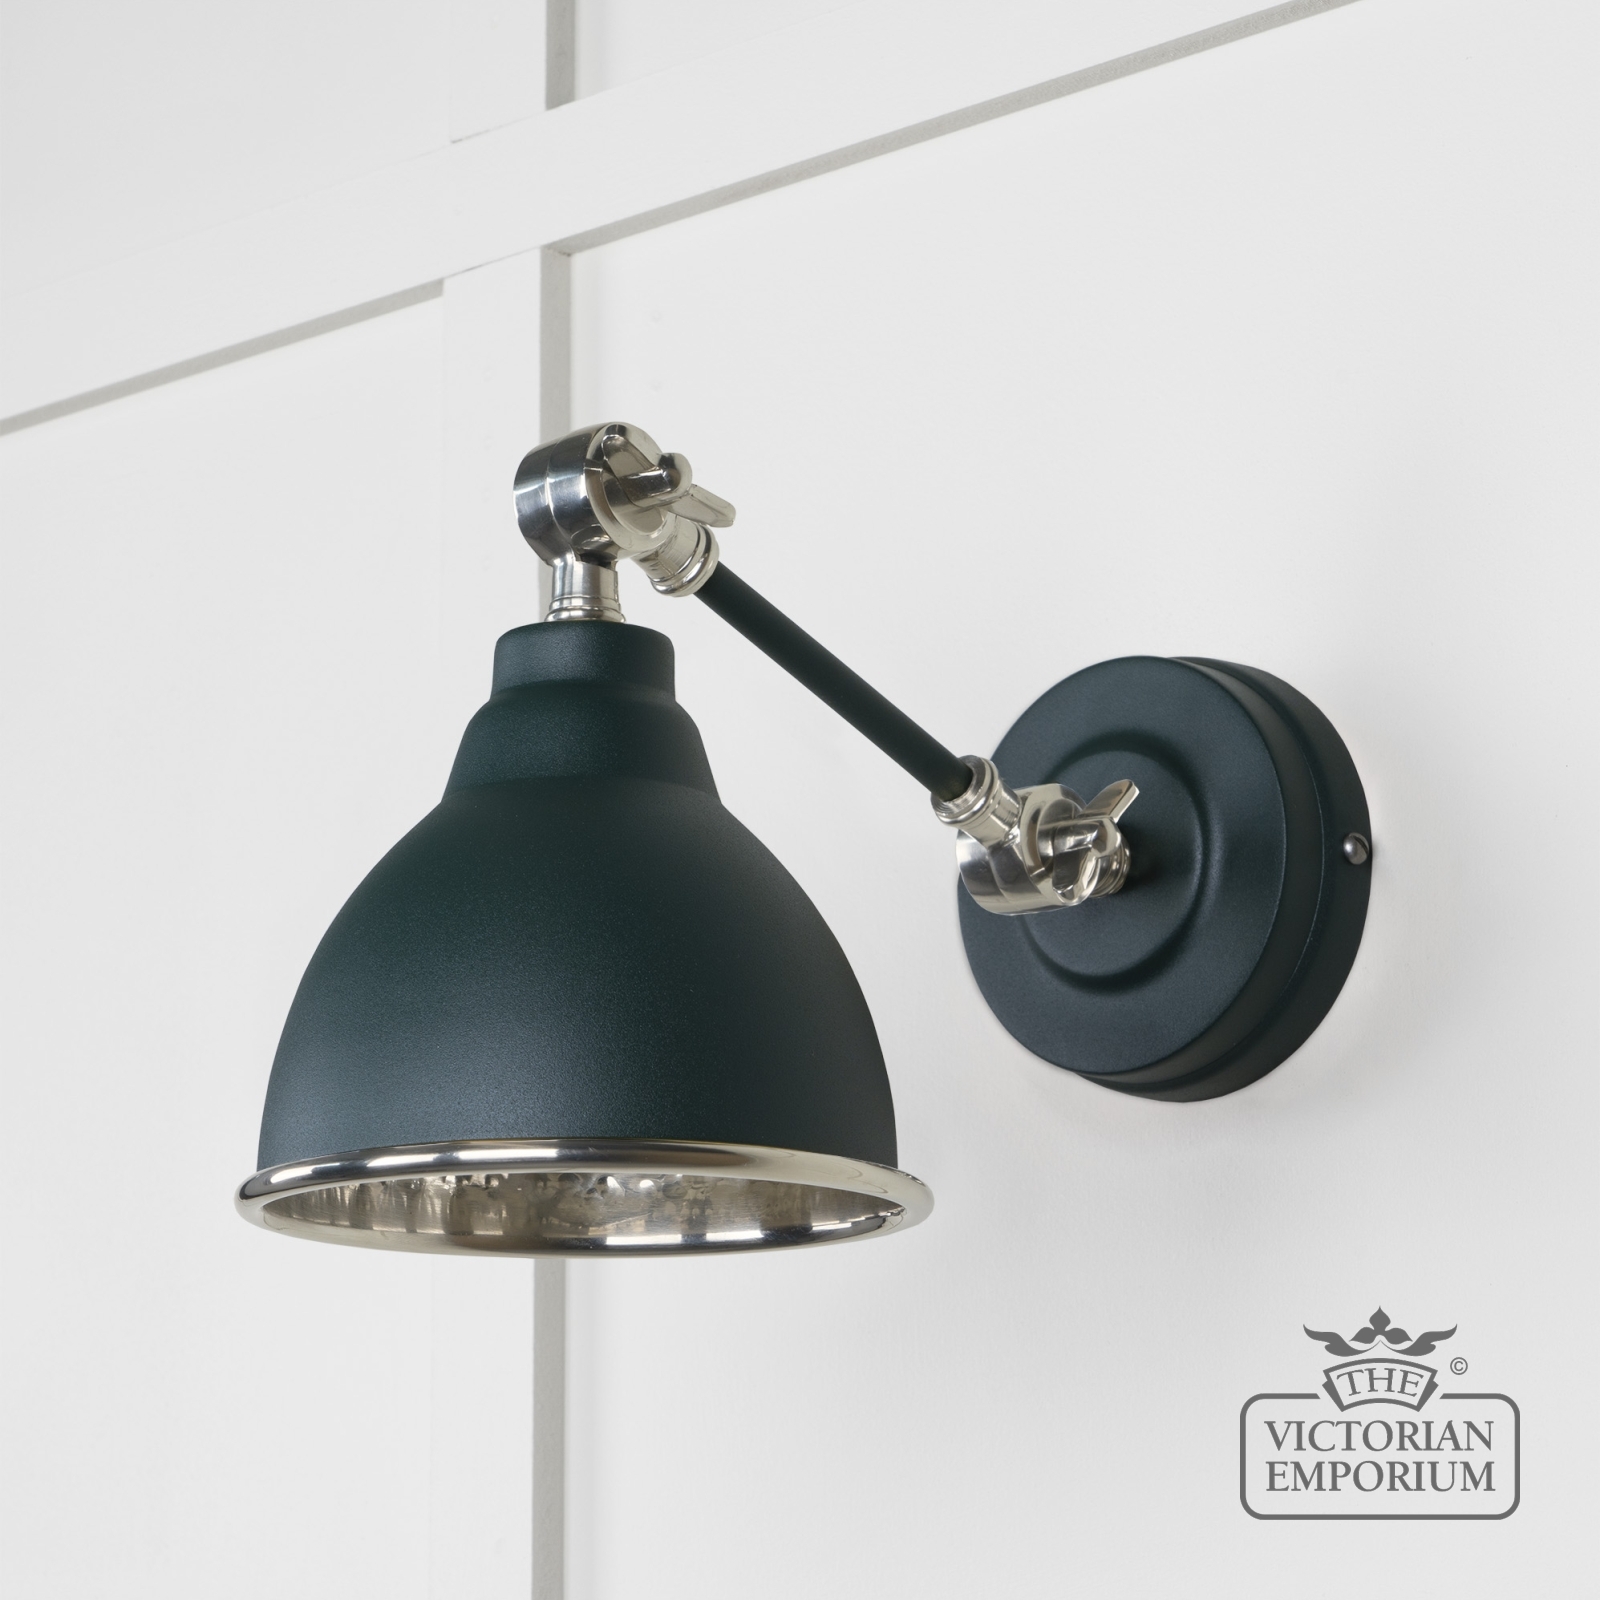 Brindle Wall Light with Hammered Nickel Interior and Dingle Exterior